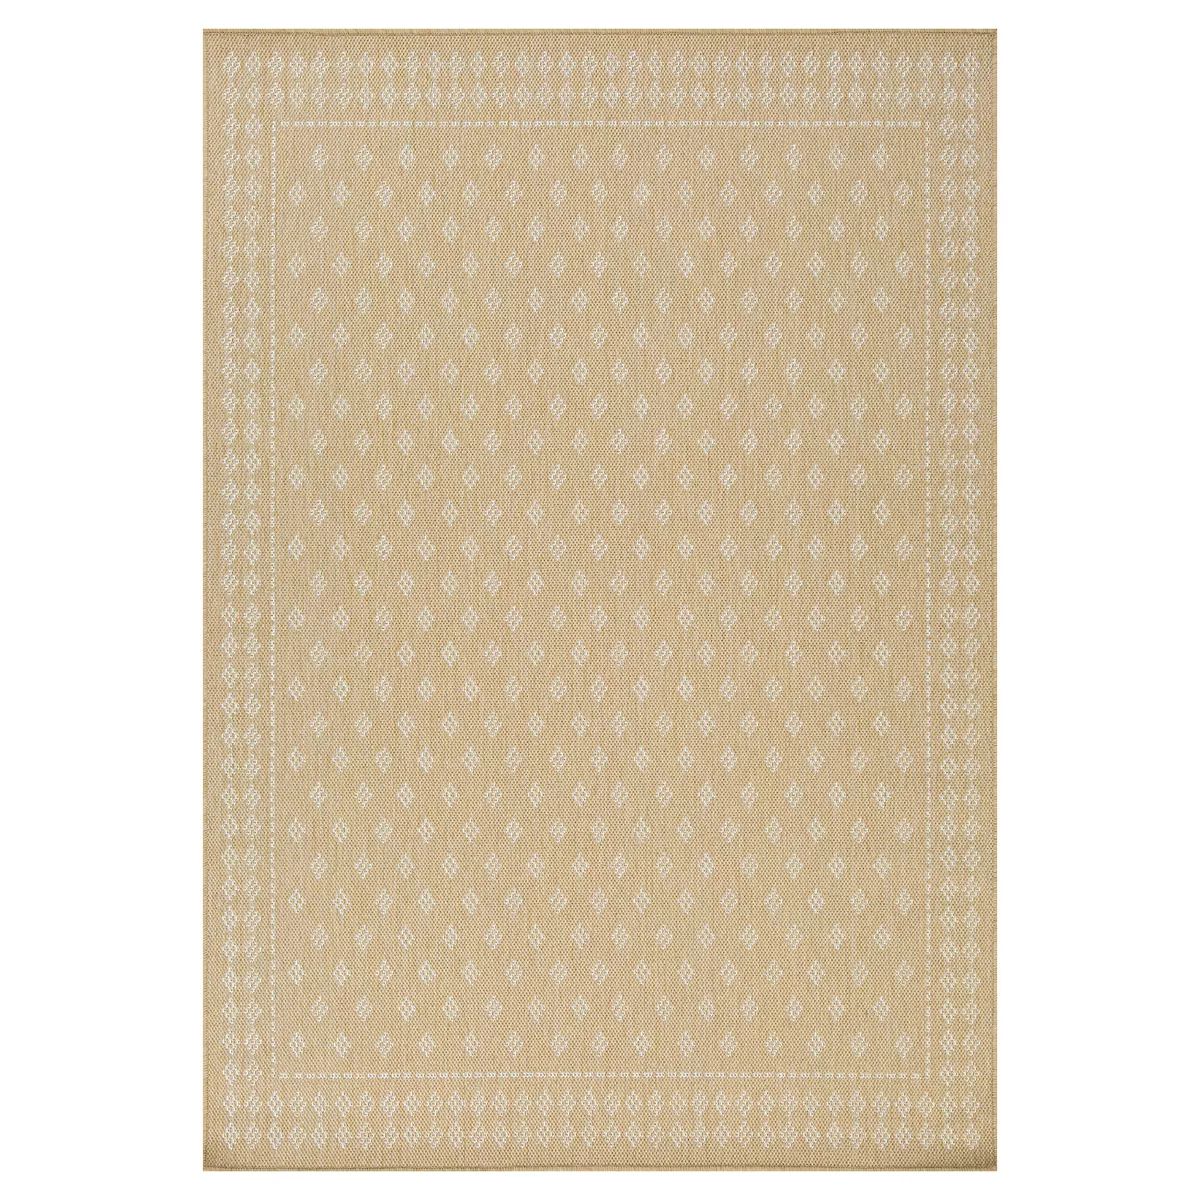 Sonoma Goods For Life® Diamond Border Indoor/Outdoor Accent + Area Rugs | Kohl's